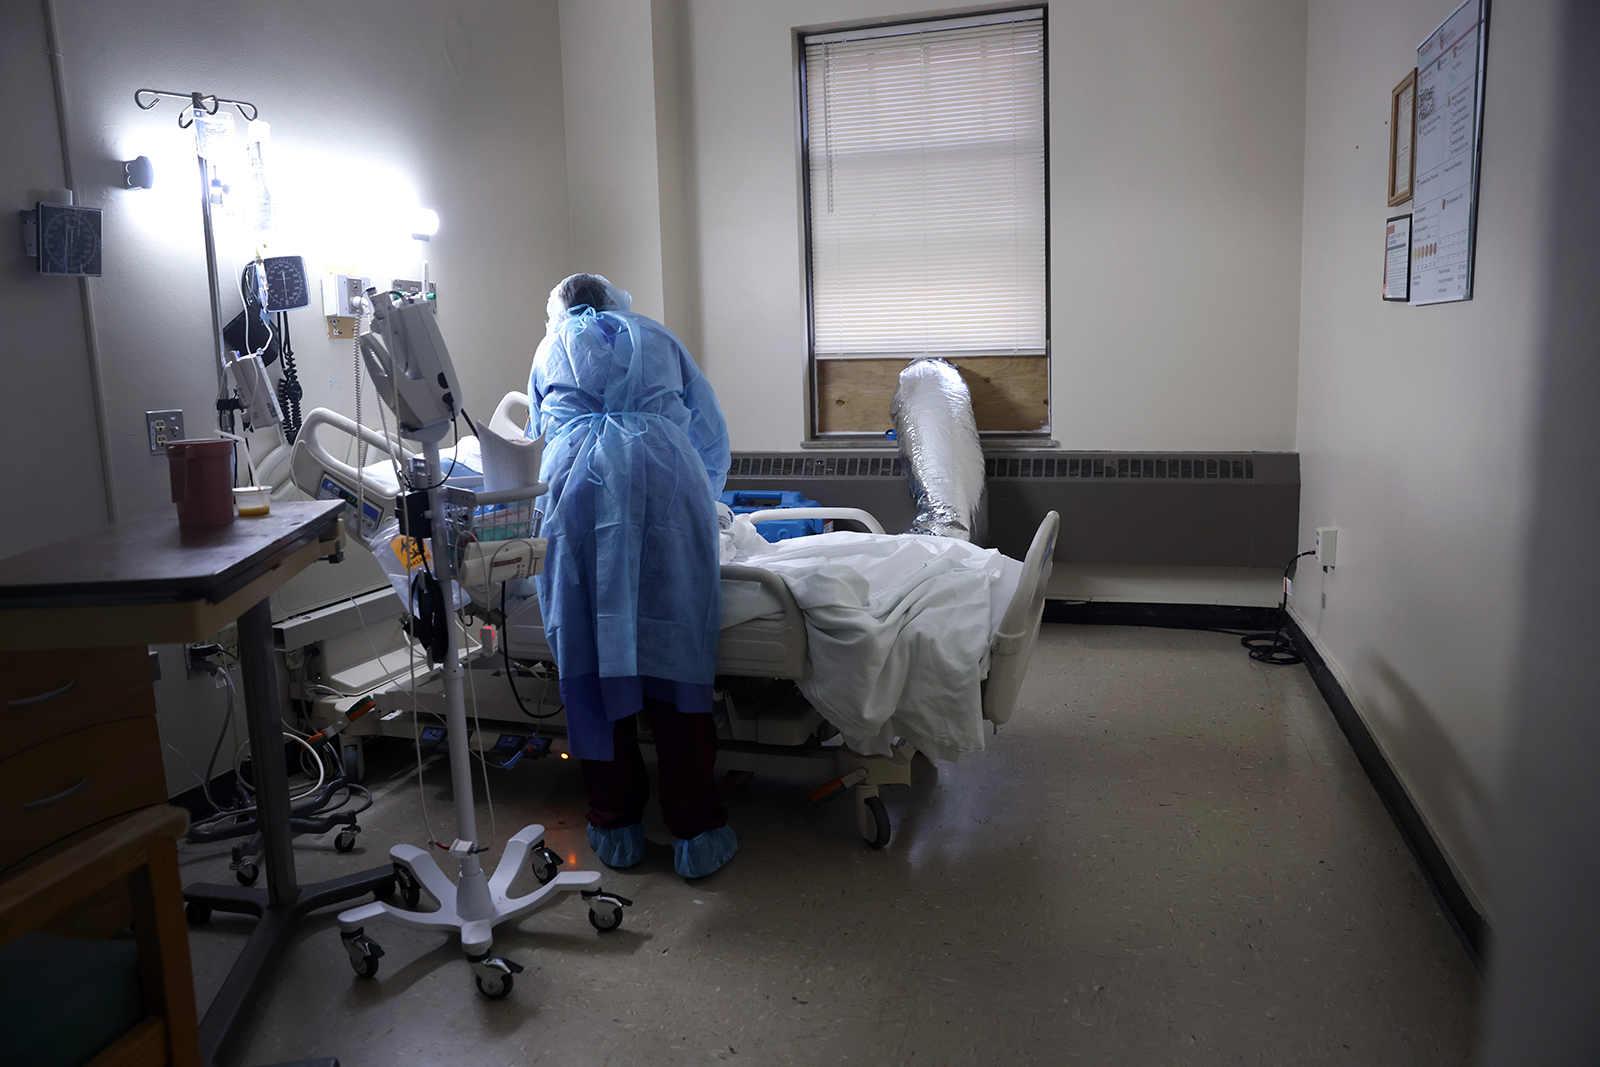 A healthcare professional gets vital information from a Covid-19 patient at Roseland Community Hospital in Chicago, Illinois, on December 17.